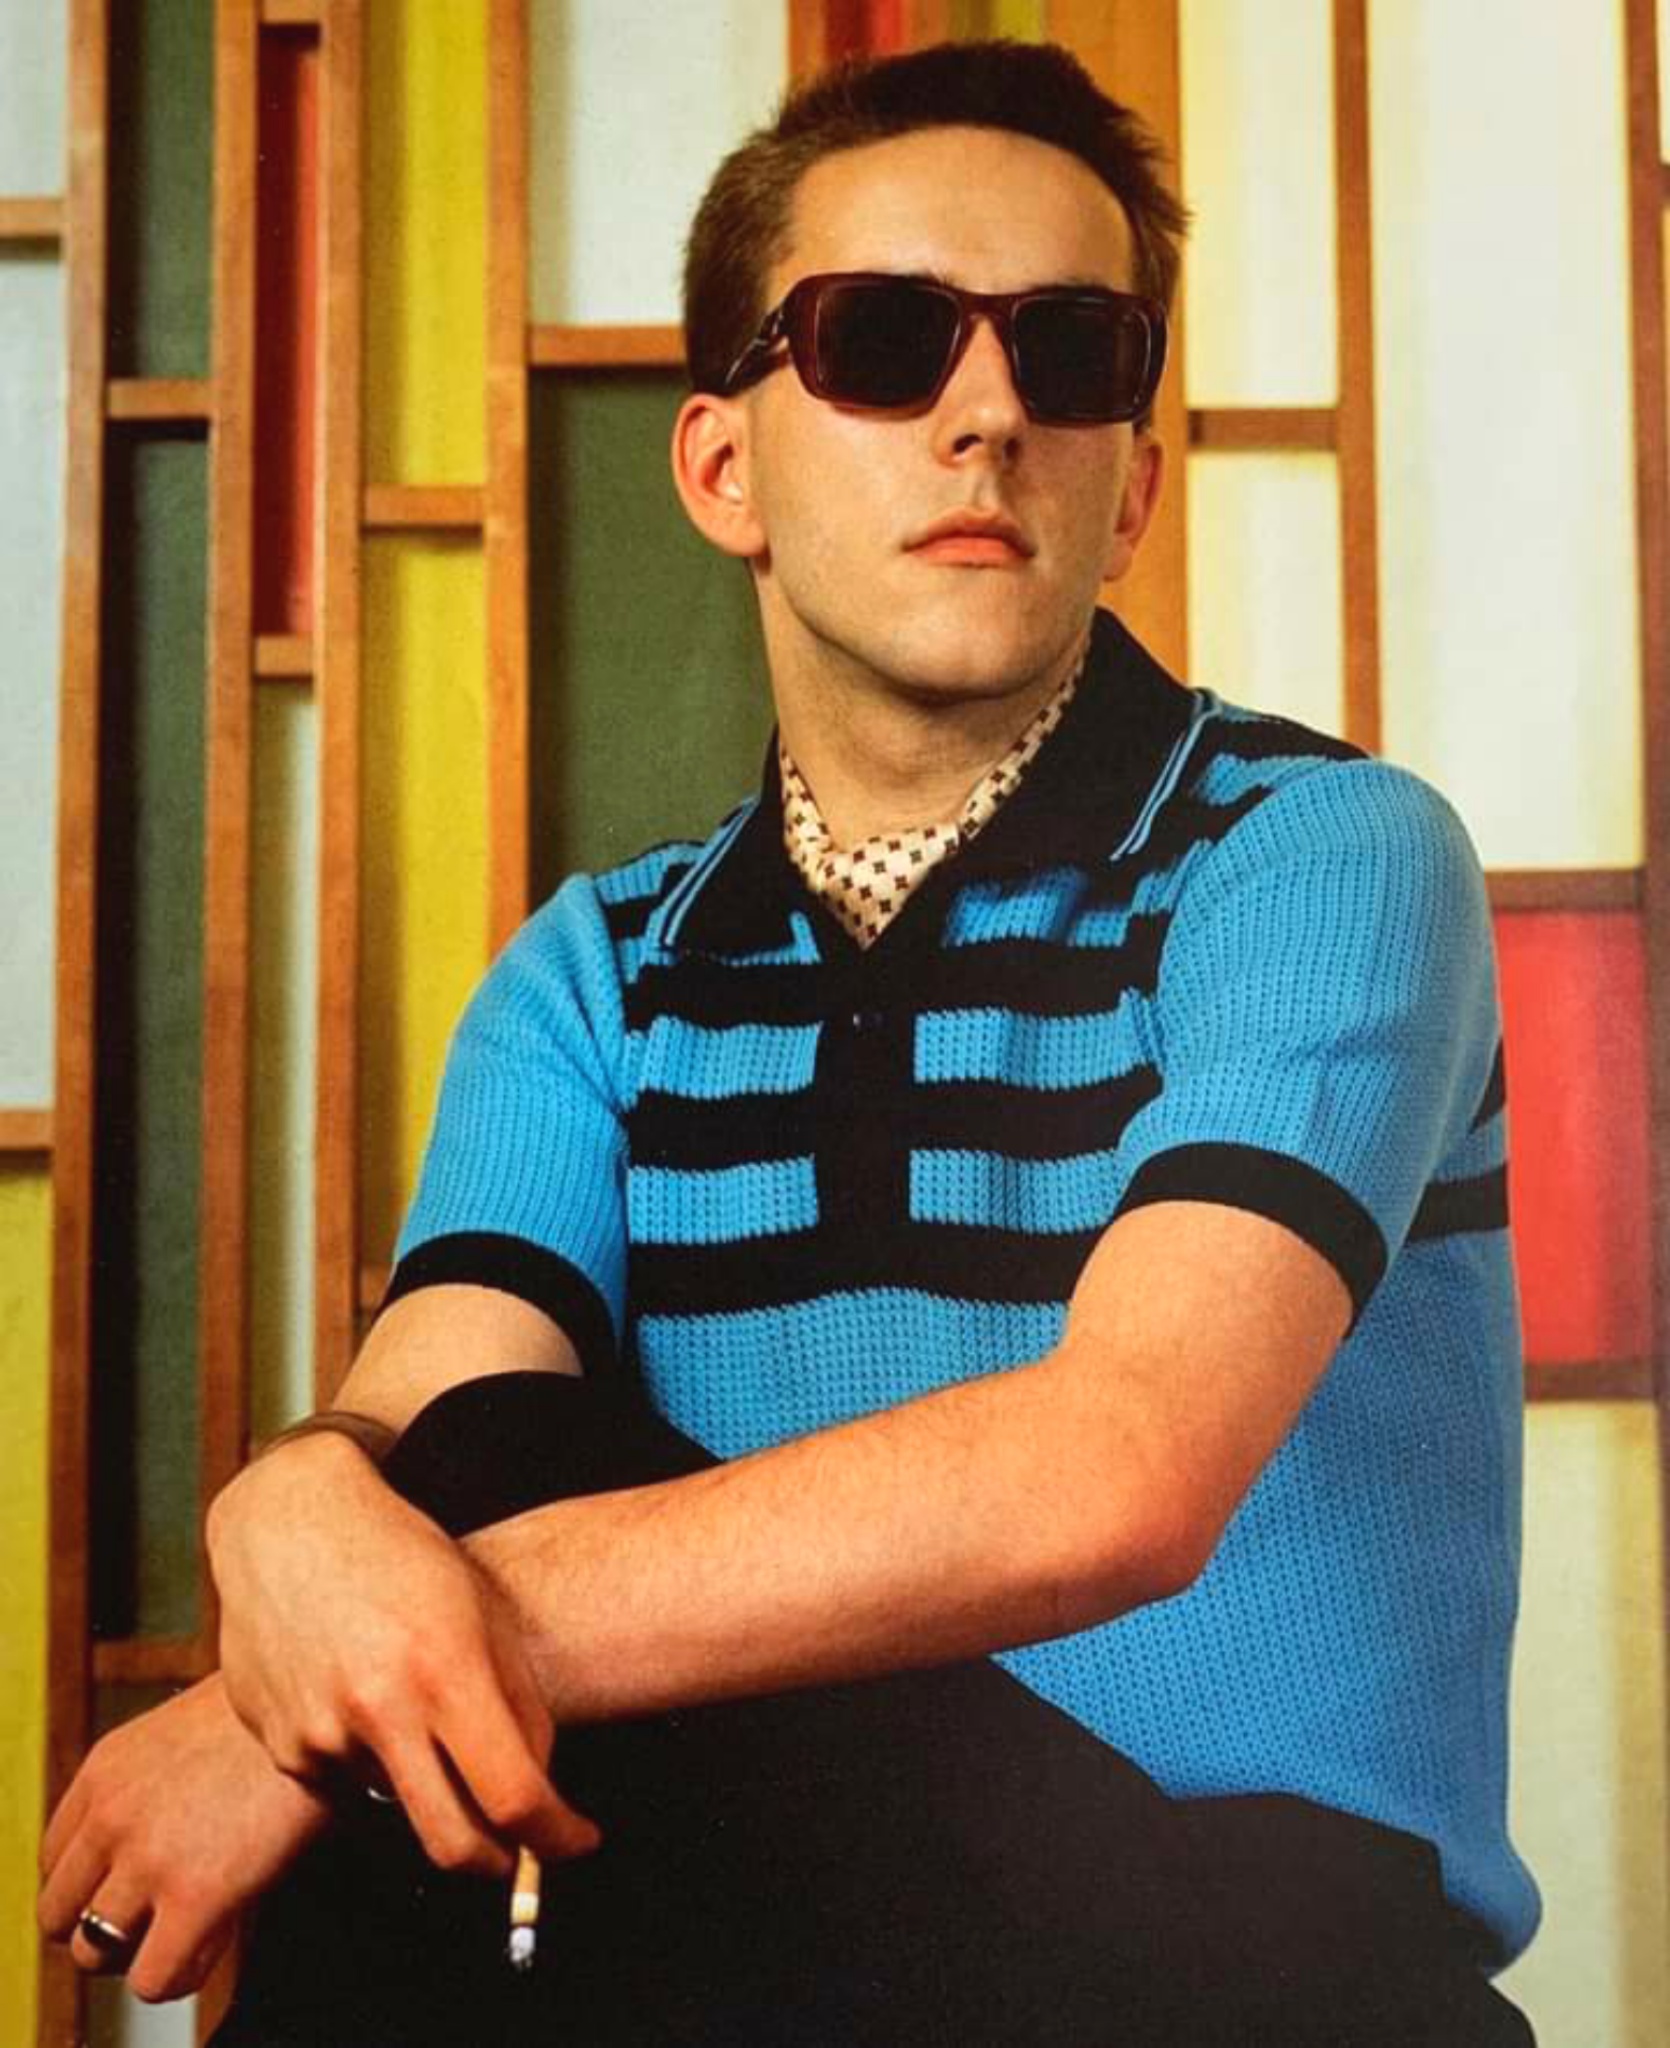 Terry Hall dies at age 63